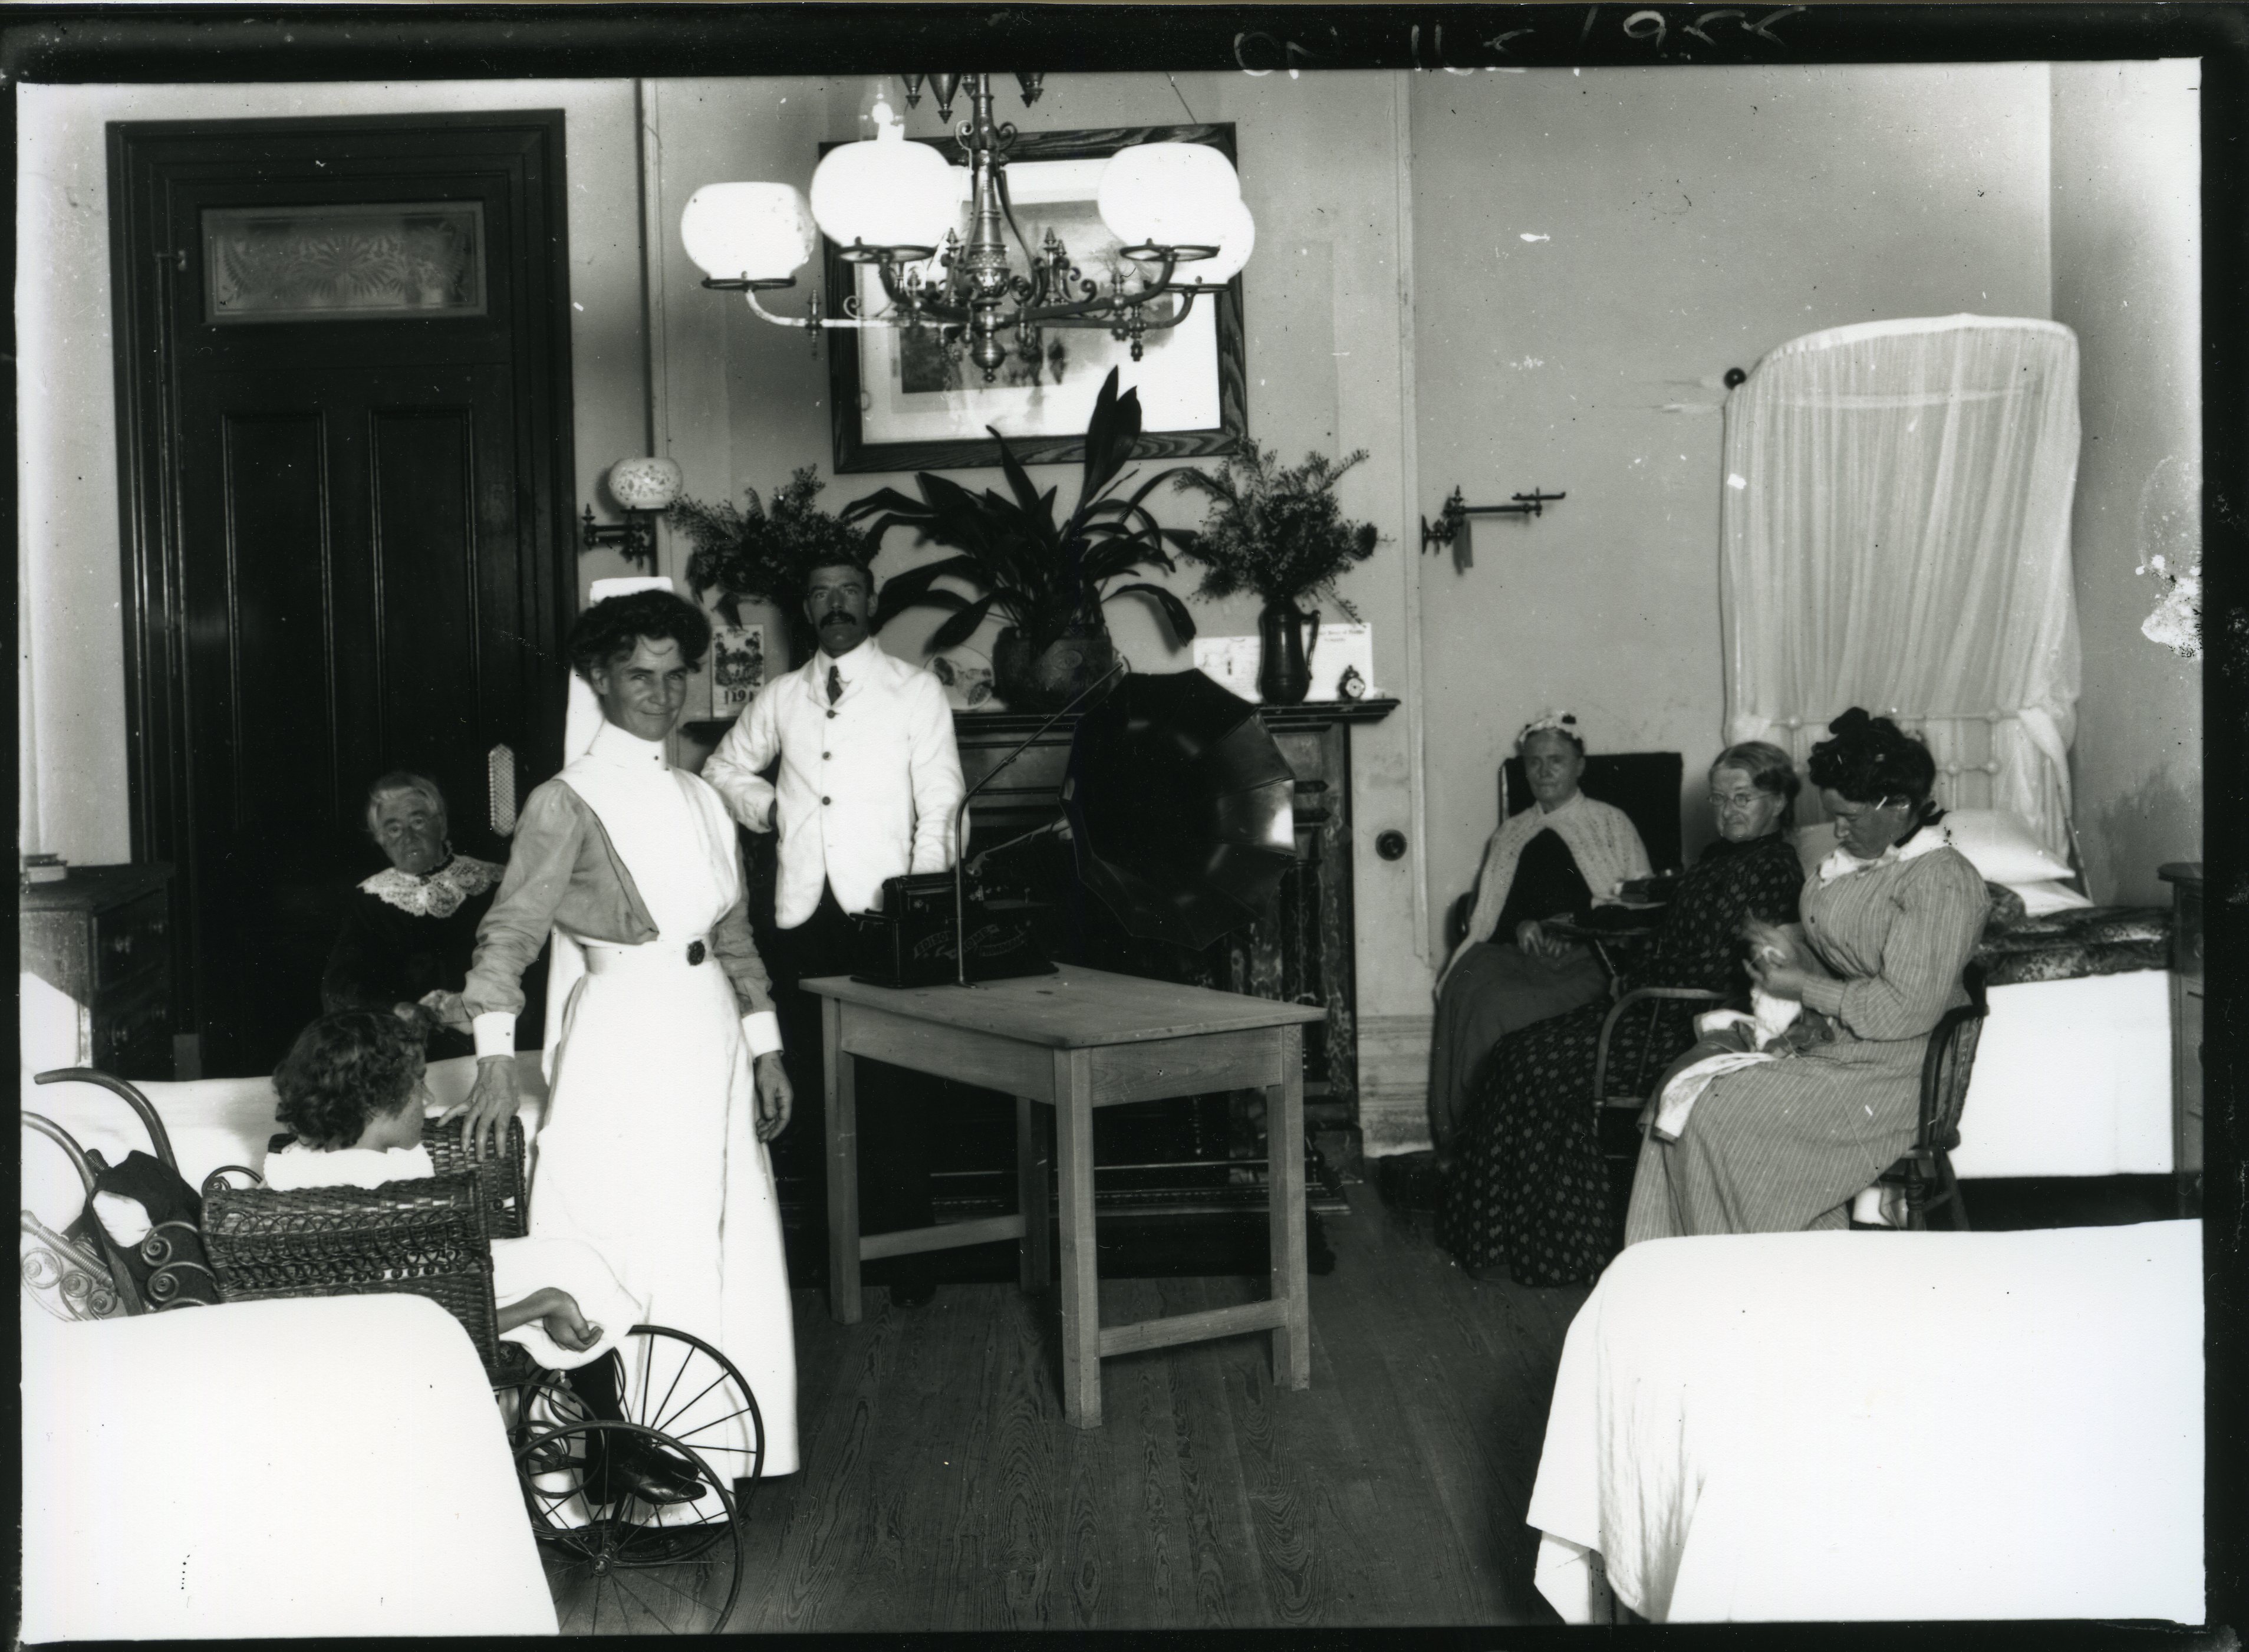 Image 3 of 4 - Black and white photo of a room. Standing in the room is a woman wearing a white nurse’s outfit and a man wearing a white suit. Patients are sitting on a bed nearby. In the middle of the room is a gramophone.